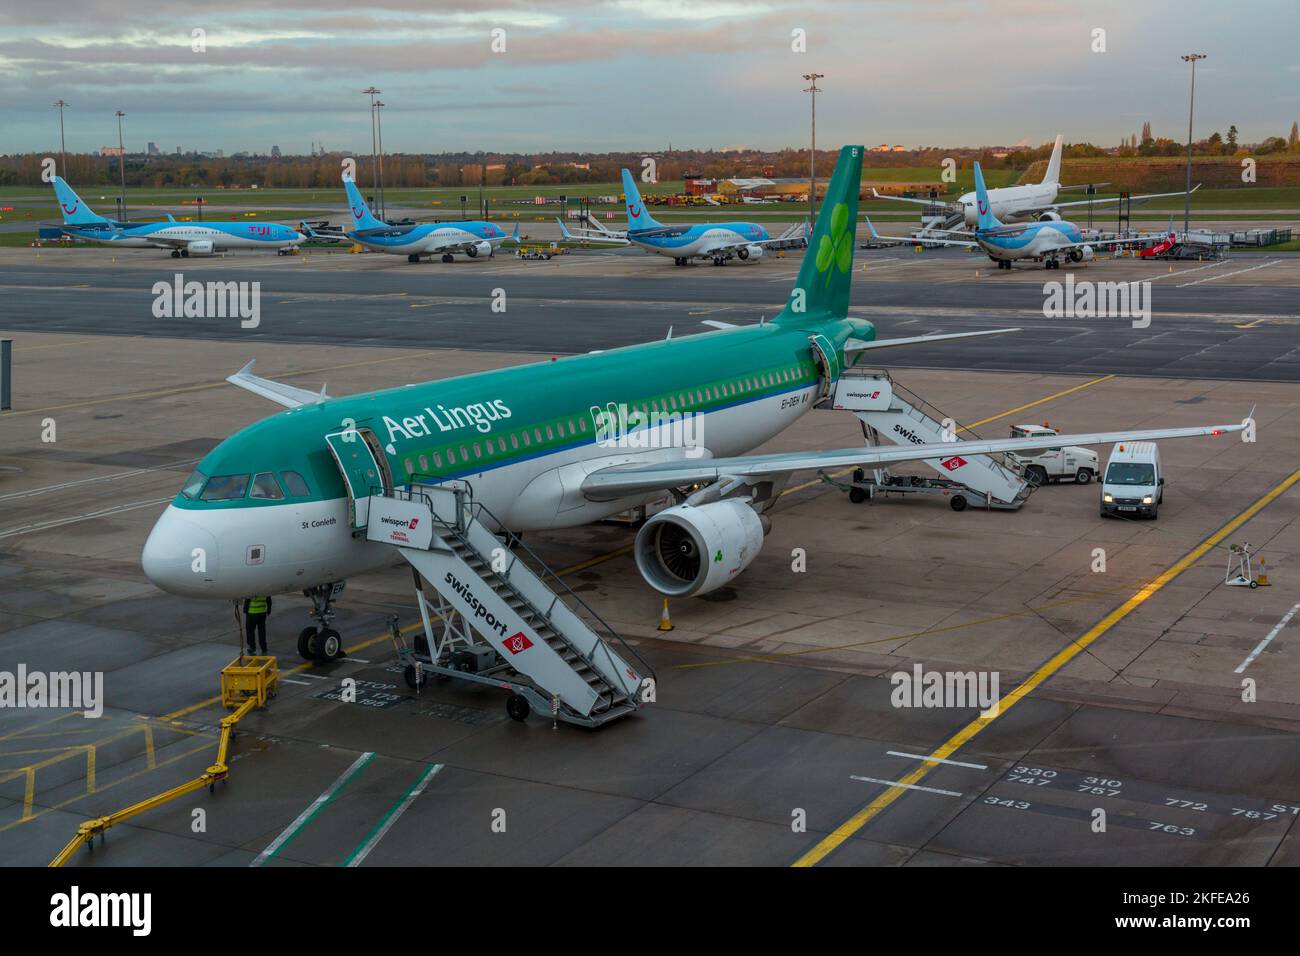 An Aer Lingus Airbus A320-200, registration EI-DEH, at Birmingham Airport in England. Stock Photo